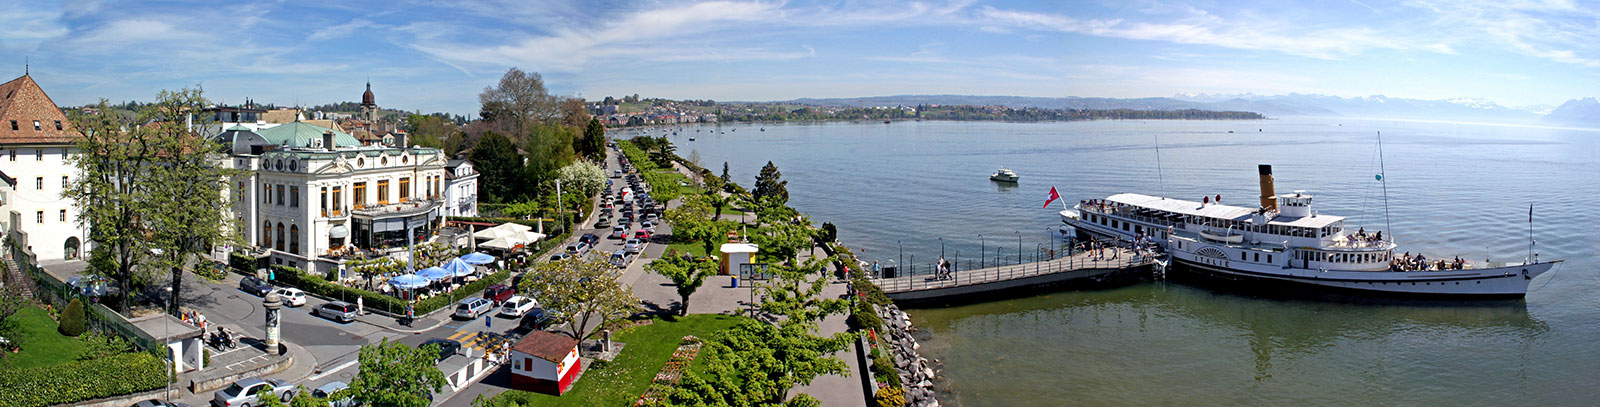 Morges on the shore of Lake Geneva